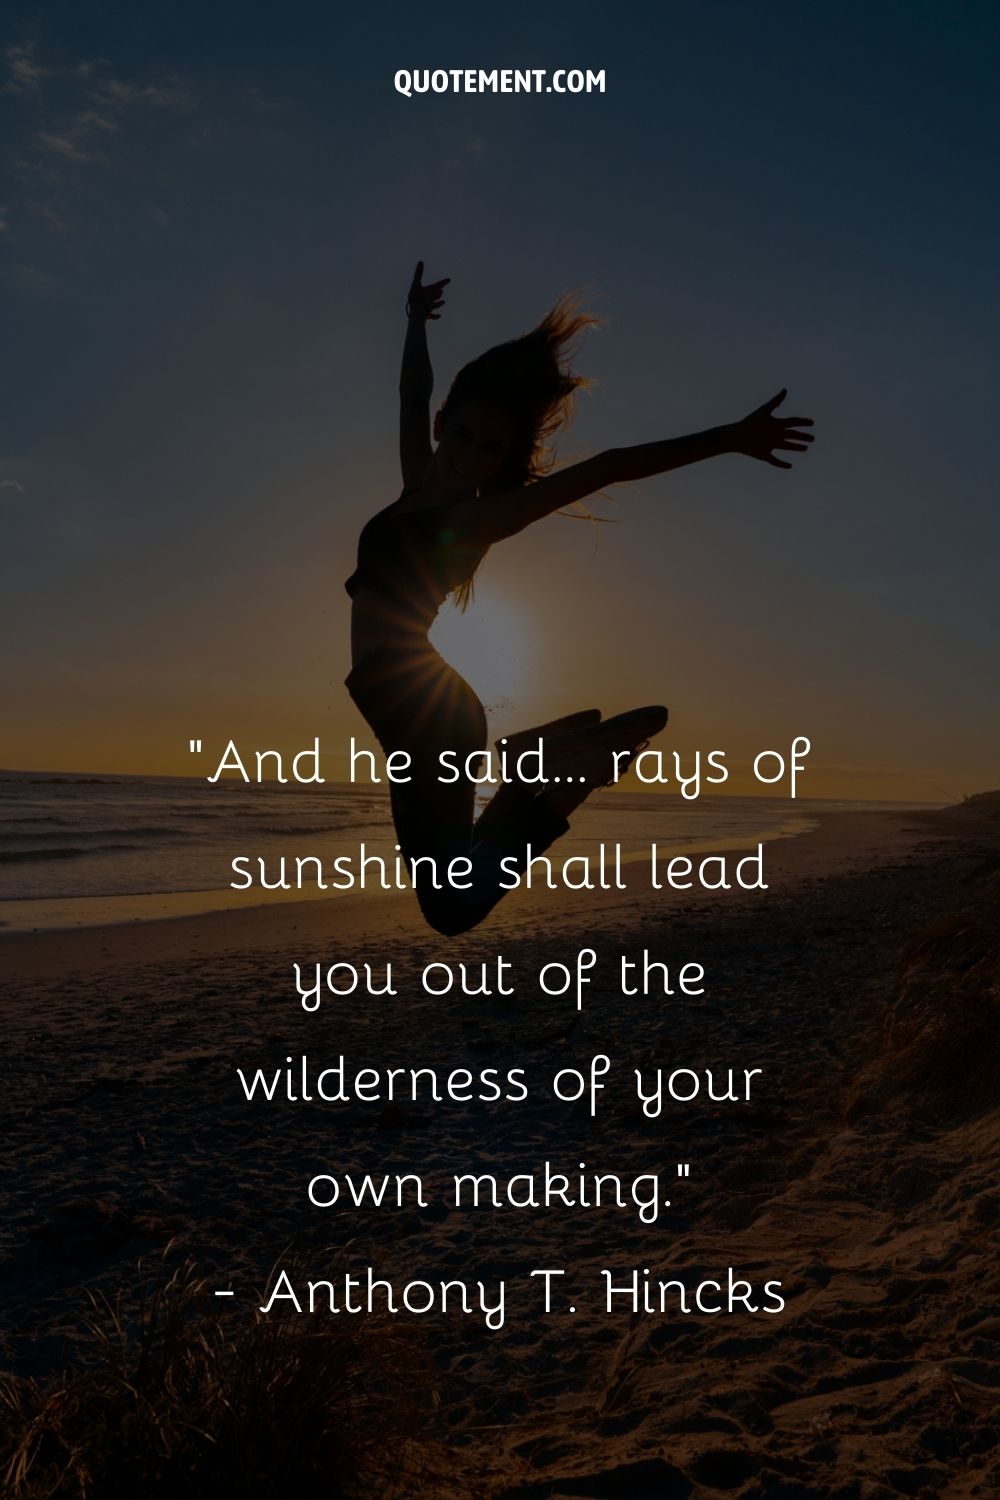 And he said… rays of sunshine shall lead you out of the wilderness of your own making